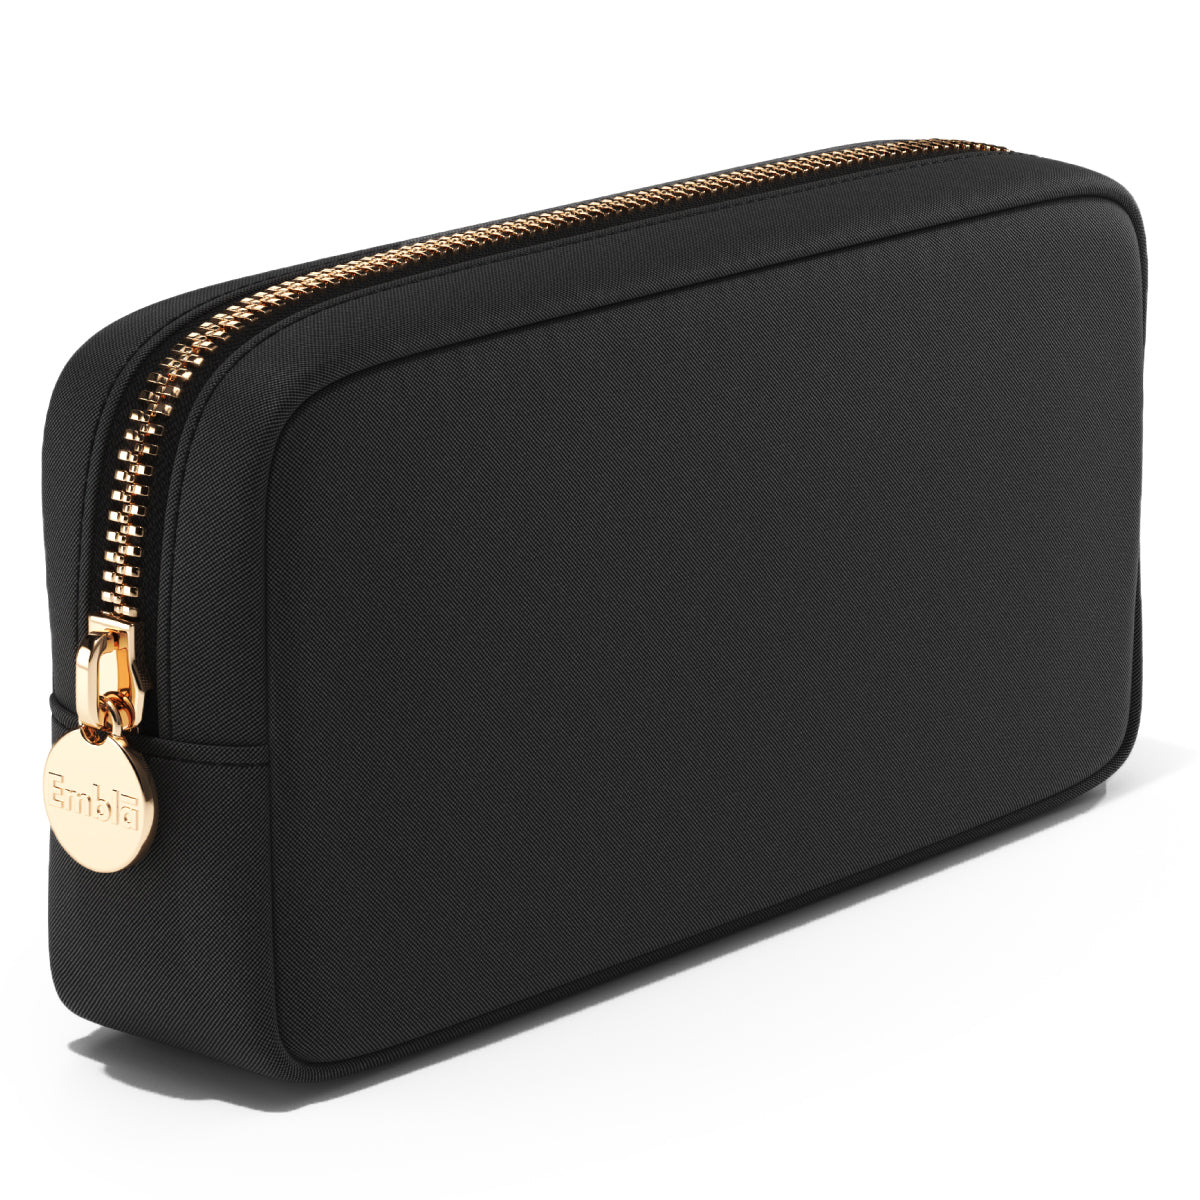 The Small Black Pouch – Embla London